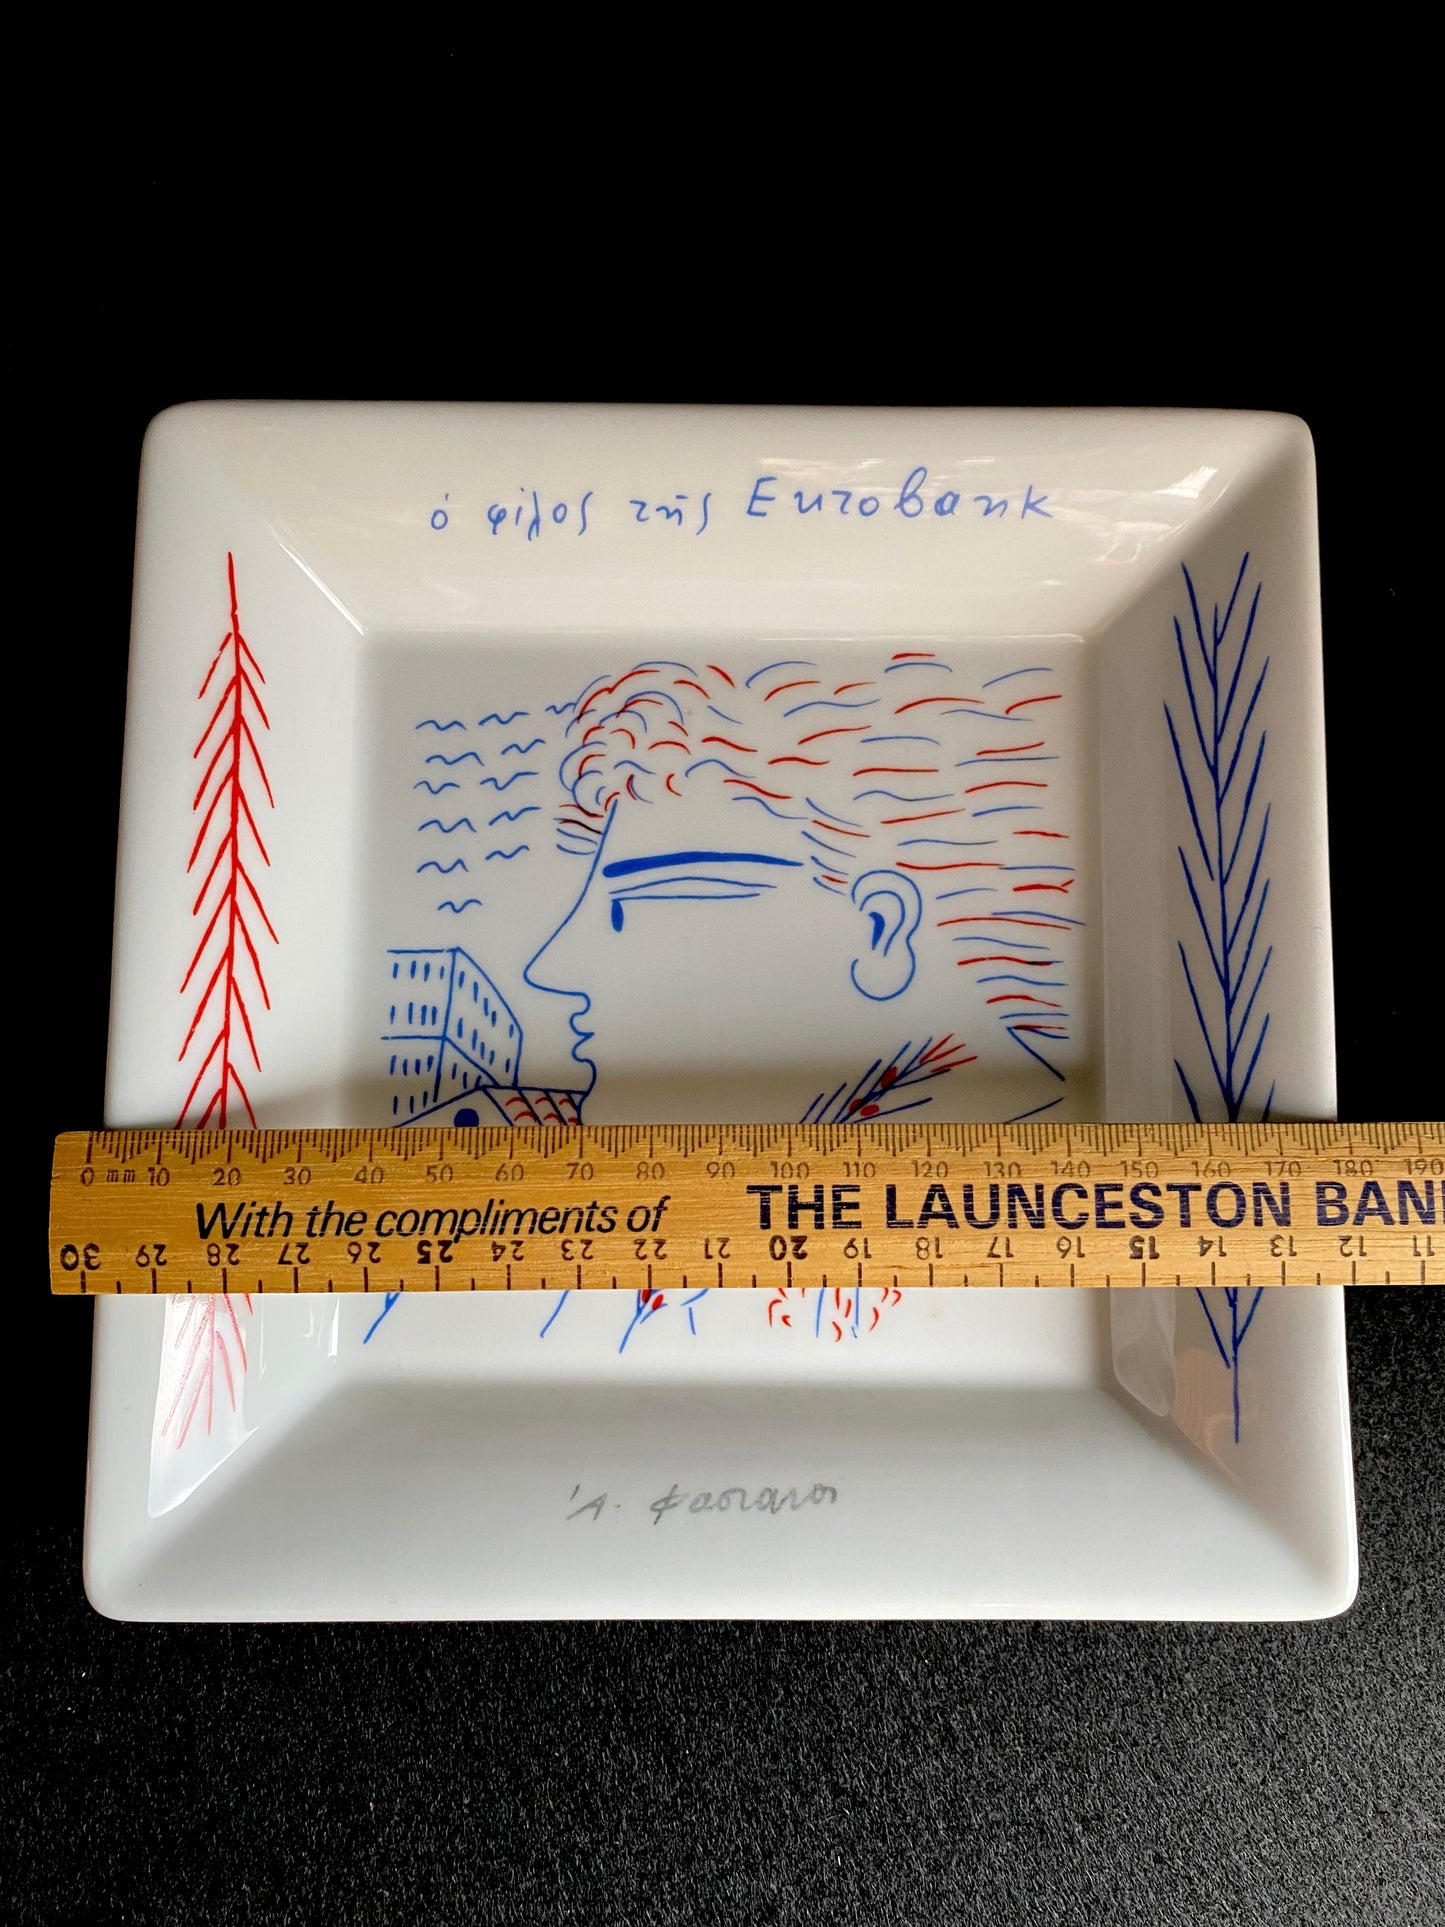 Alekos Fassianos - Limoge France - The Friend of Euro Bank - Limited Edition - ceramic square bowl